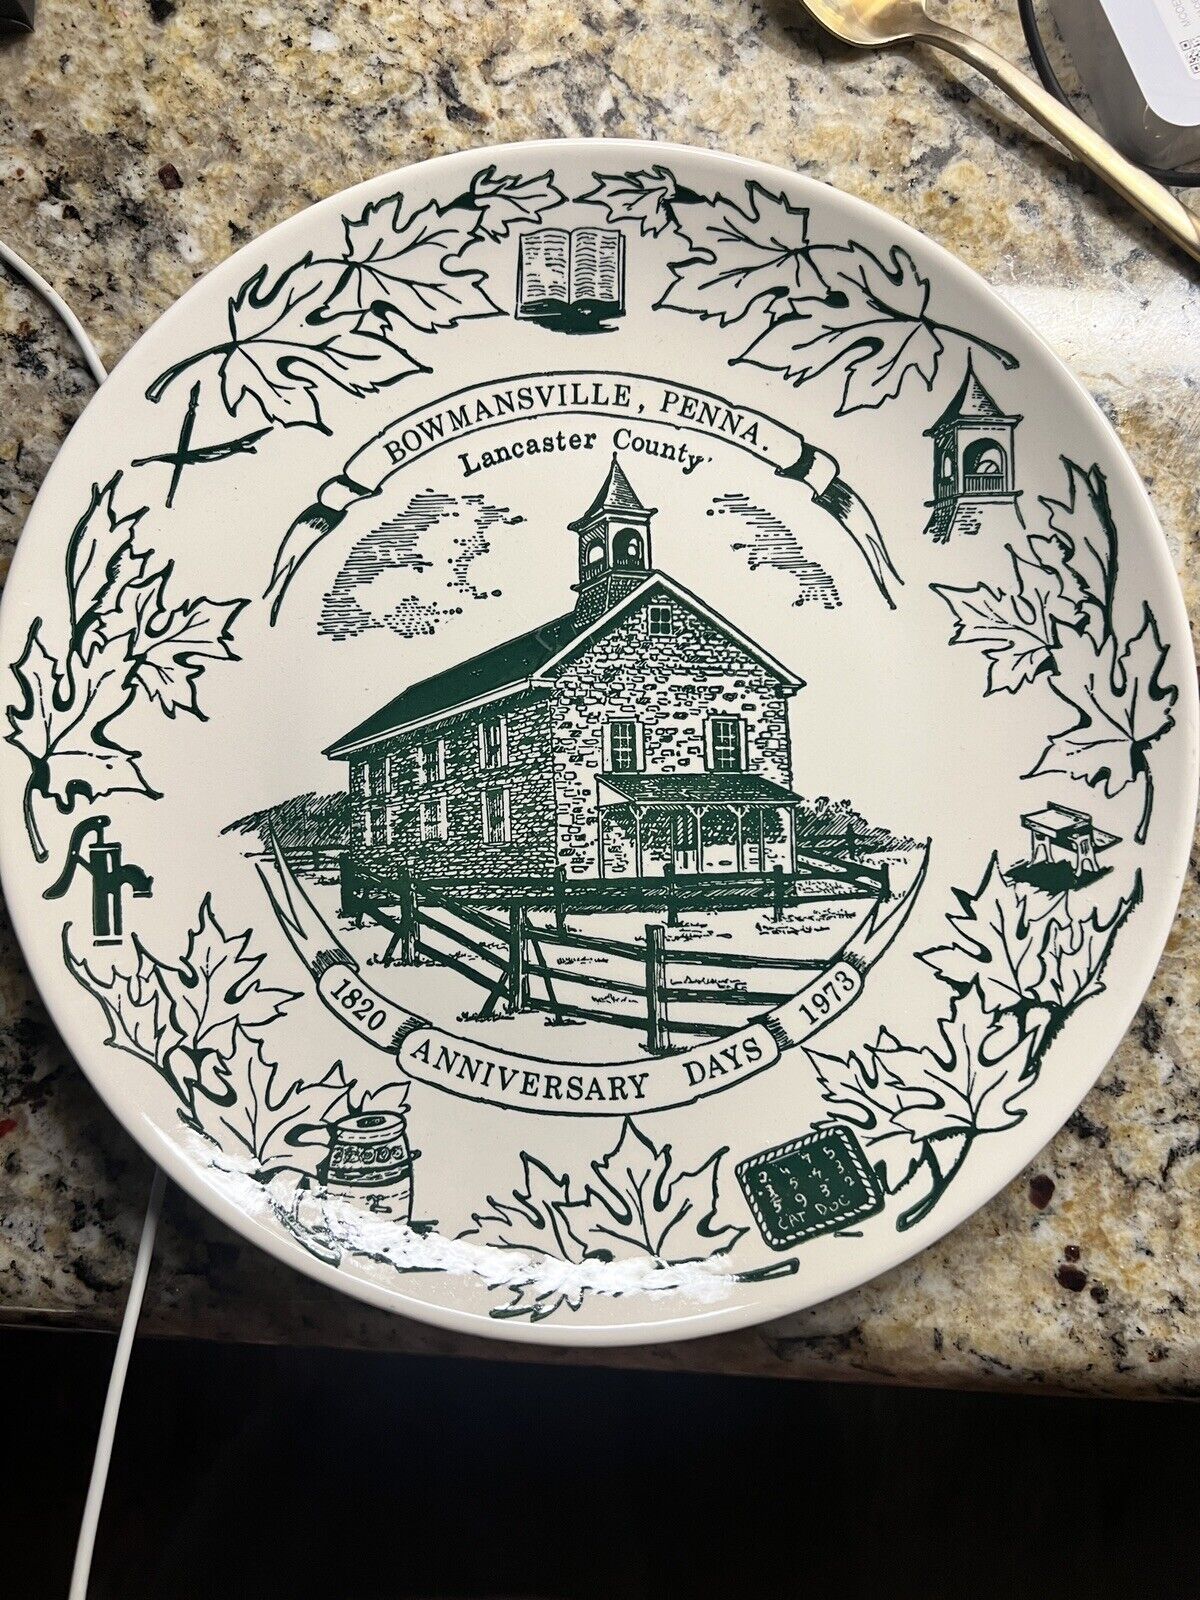 Bowmansville Penna, Lancaster PA Anniversary Days Collector Plate 1820-1973